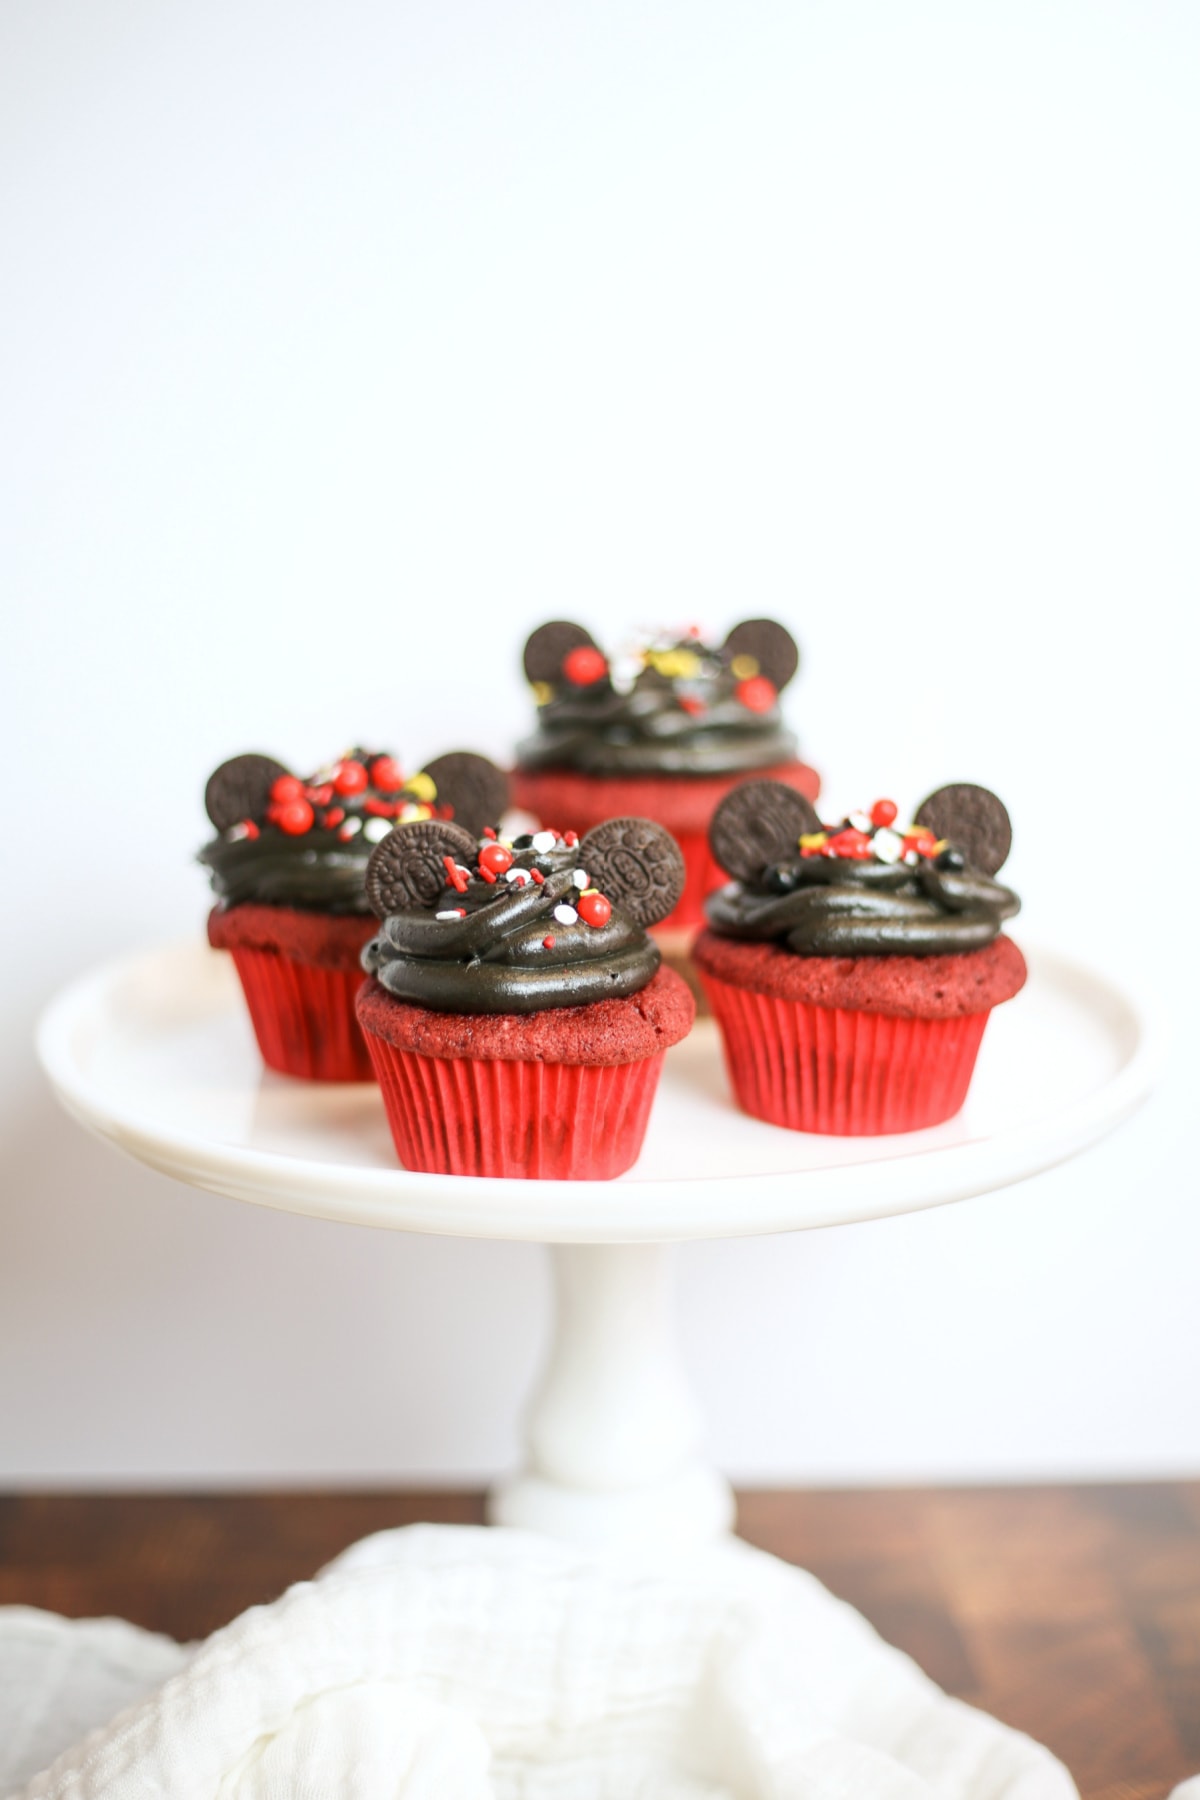 Four Mickey Mouse cupcakes on white cake plate